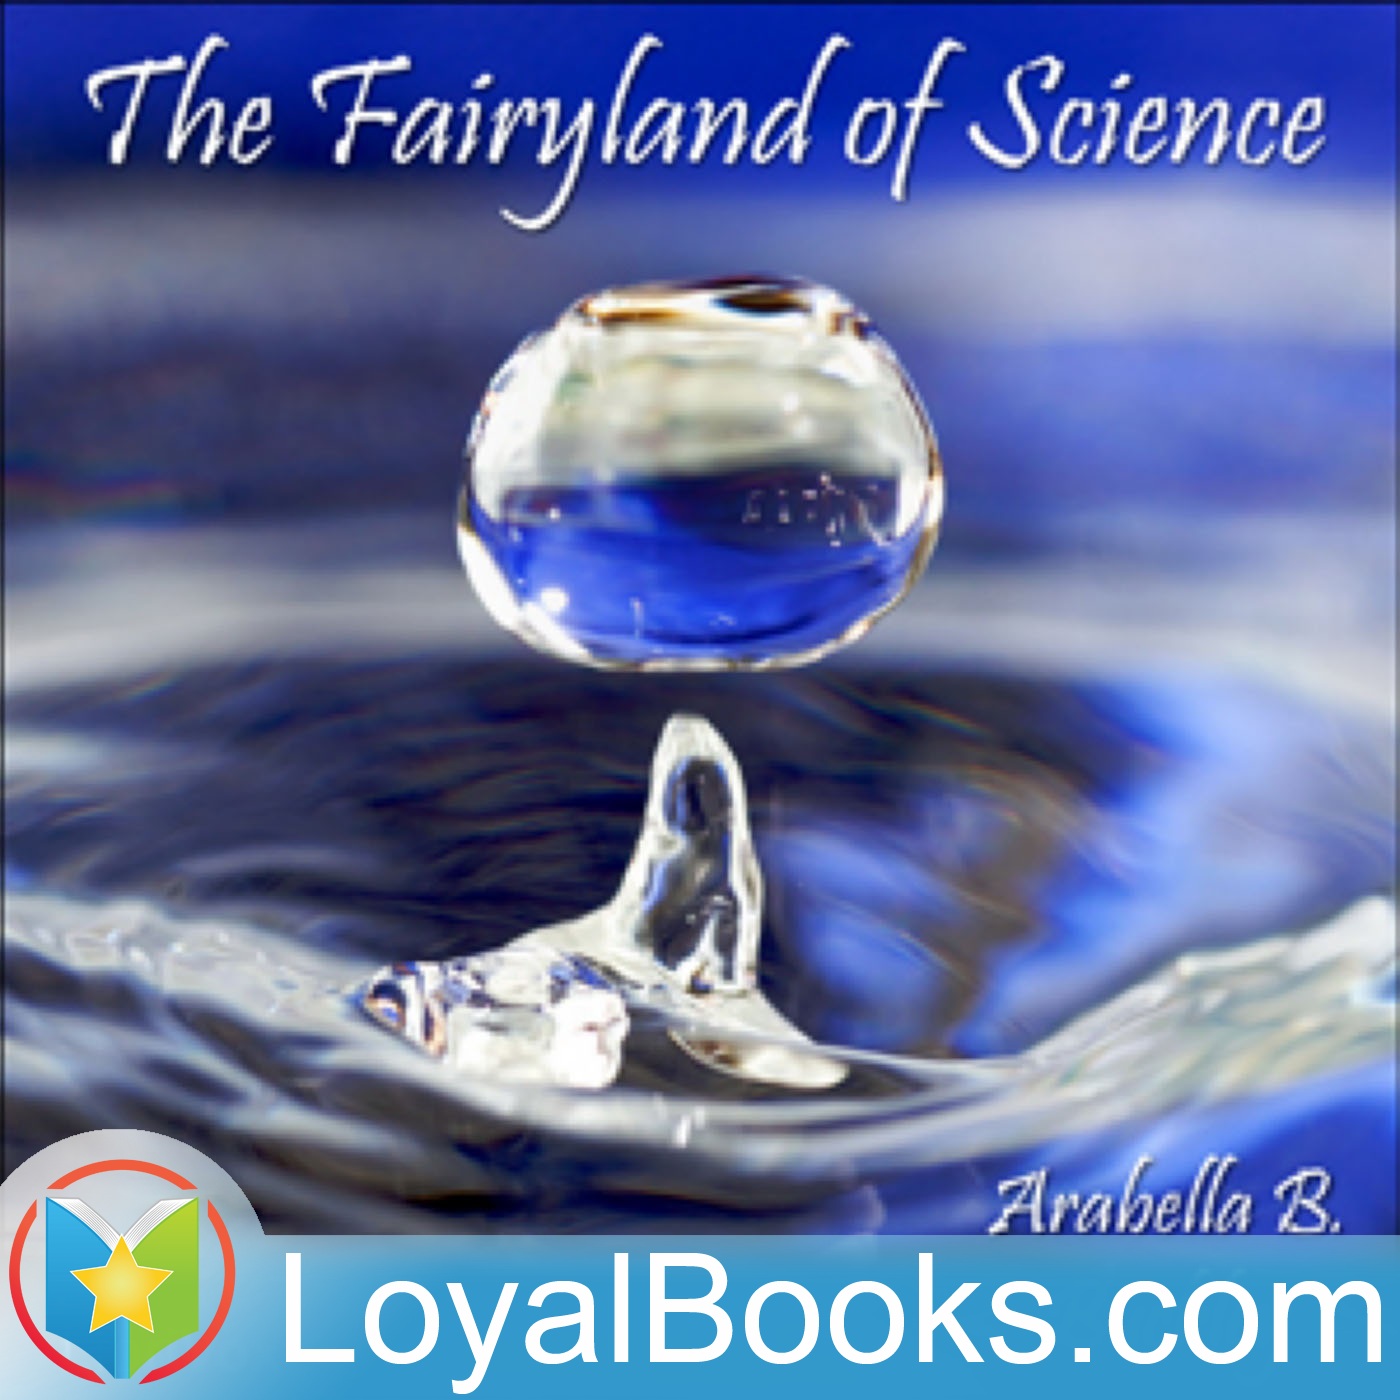 The Fairyland of Science by Arabella Buckley